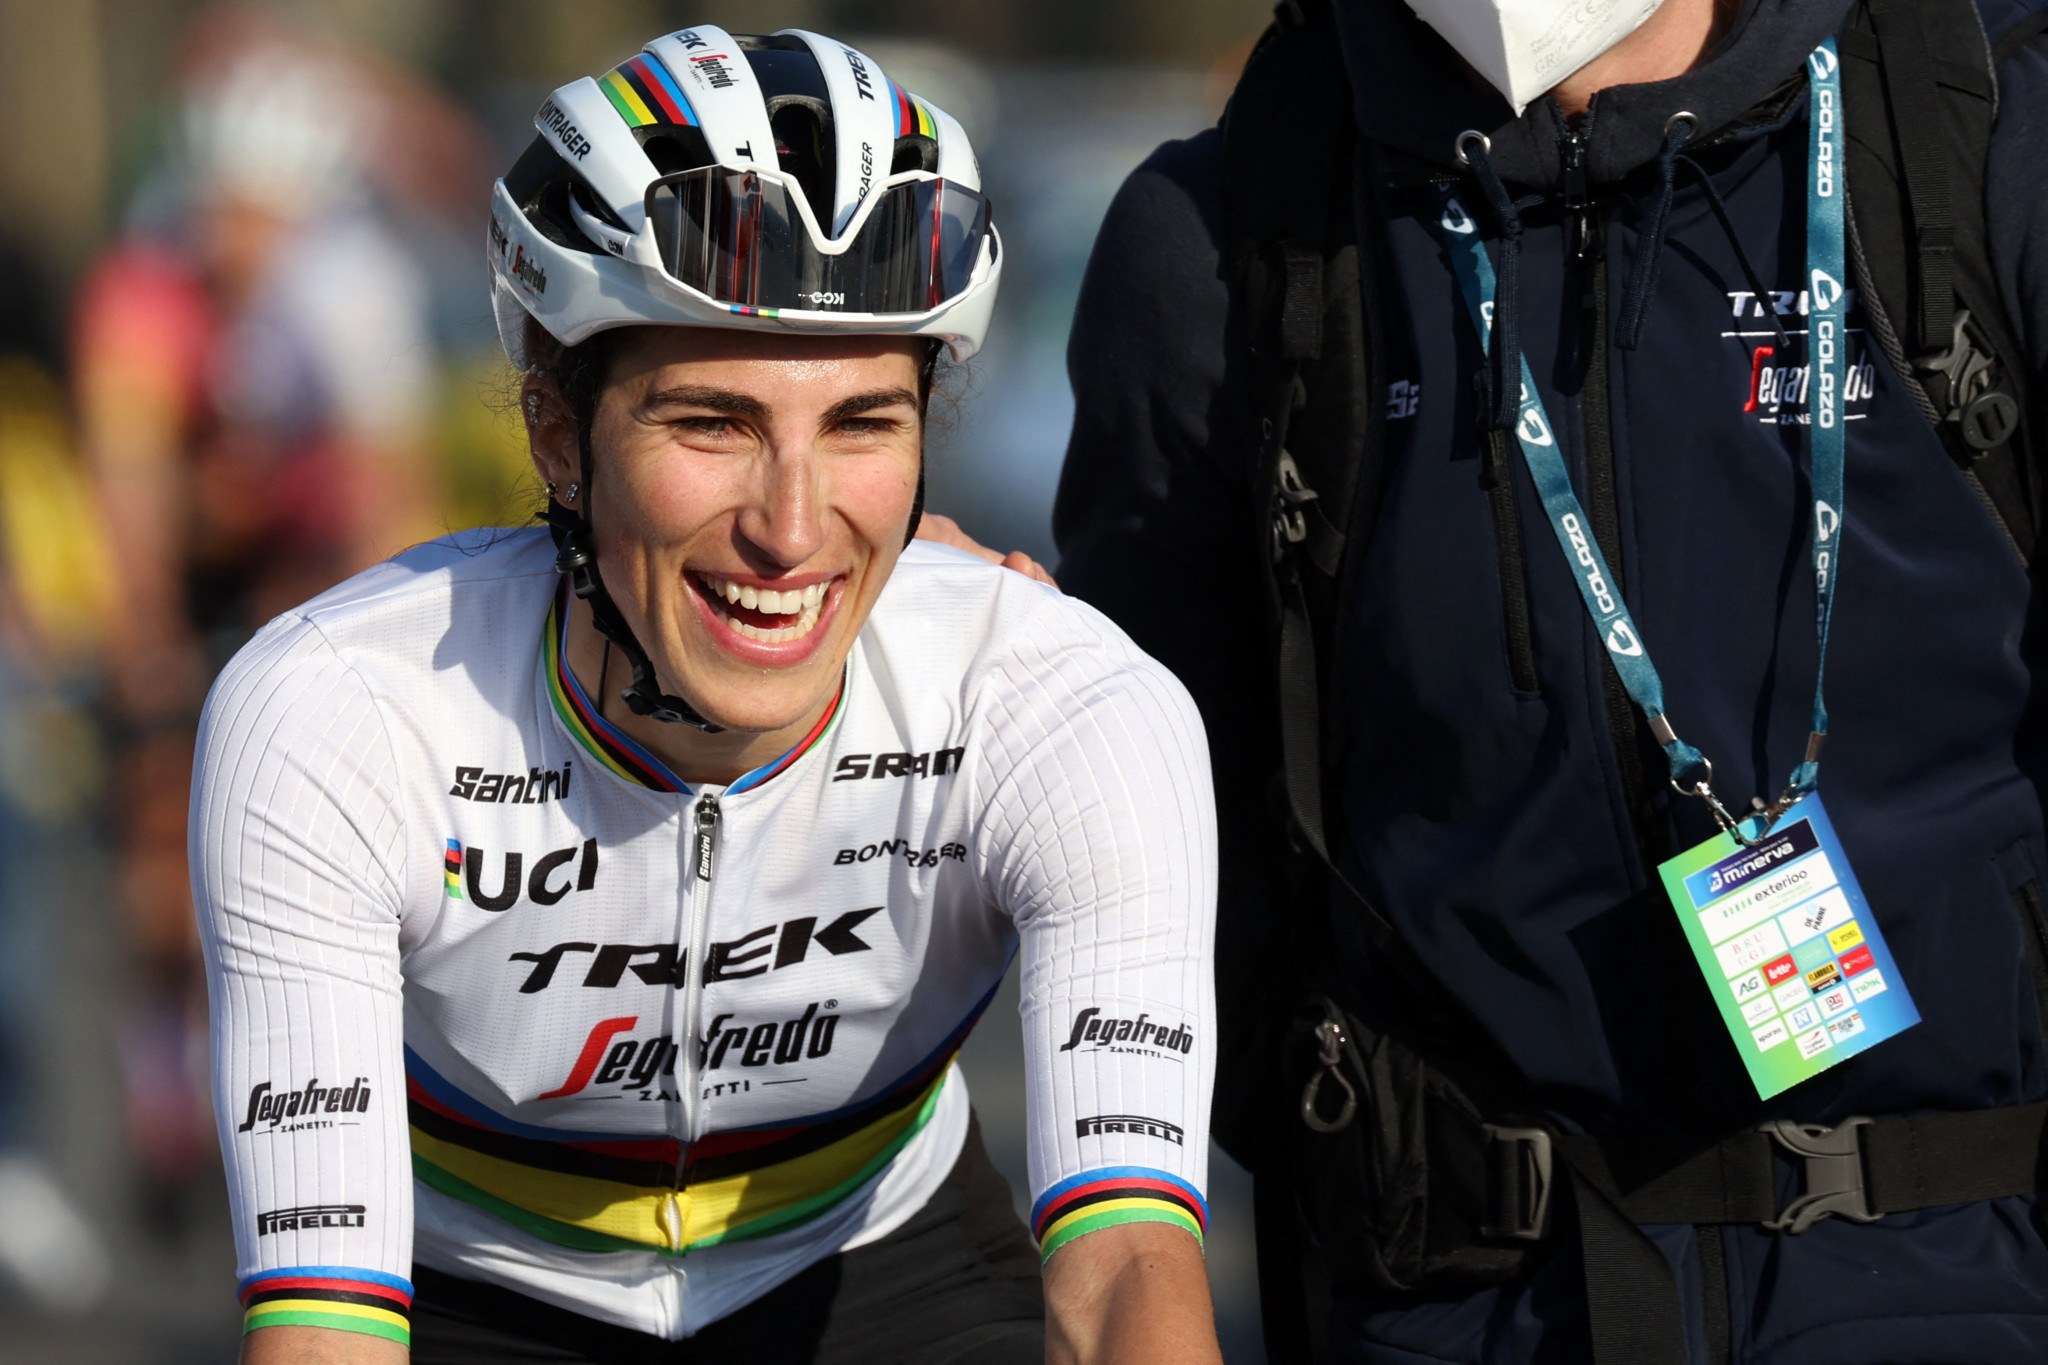 Balsamo wins second stage on Giro d'Italia Donne debut